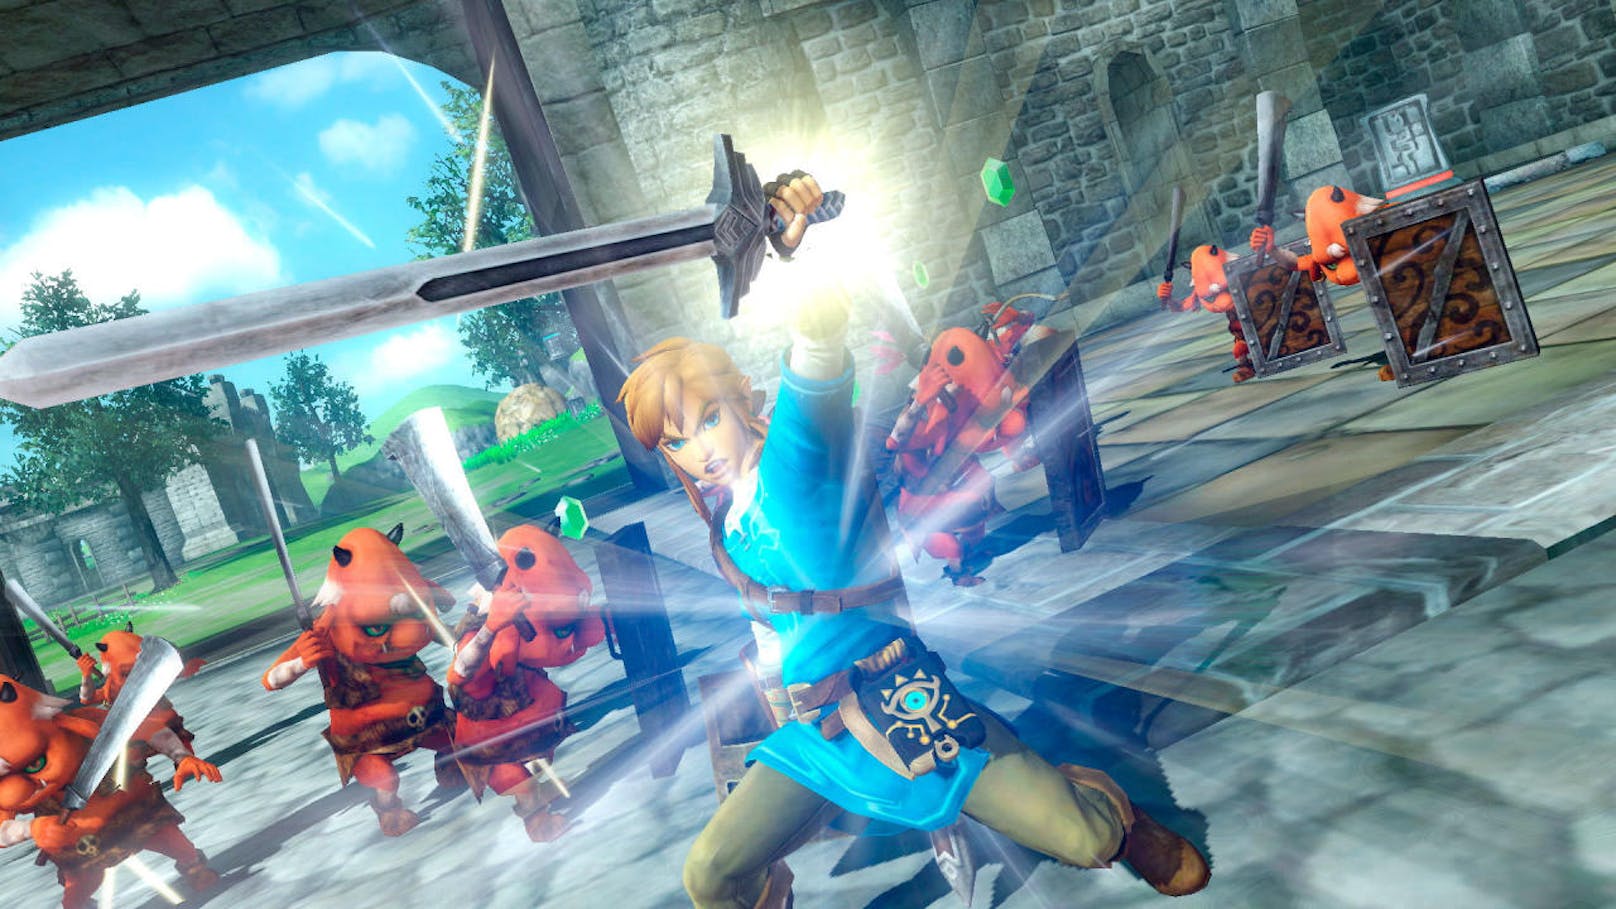  <a href="https://www.heute.at/digital/games/story/Hyrule-Warriors-Definitive-Edition-Test-Review-Nintendo-Switch-50930469" target="_blank">Hyrule Warriors: Definitive Edition</a>